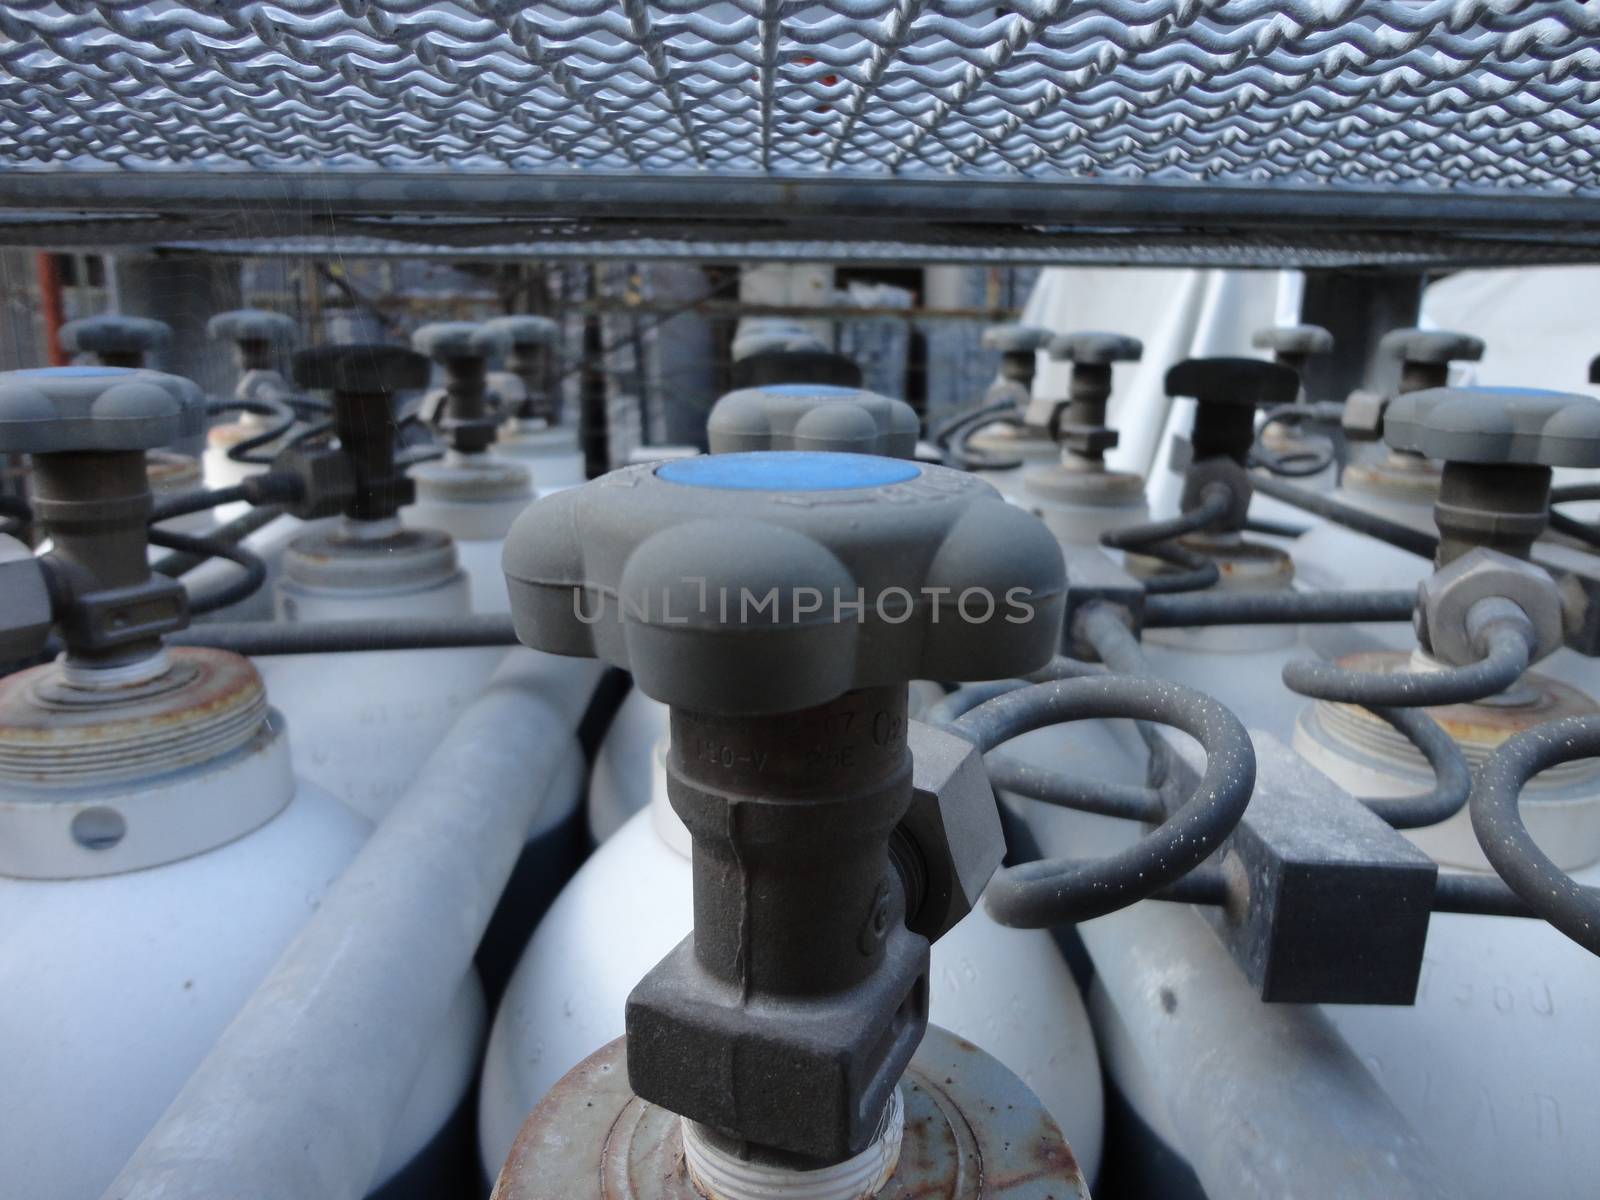 Bottled Valves of an industrial stock of used bottled/cylinders. Manufacture factory of granites